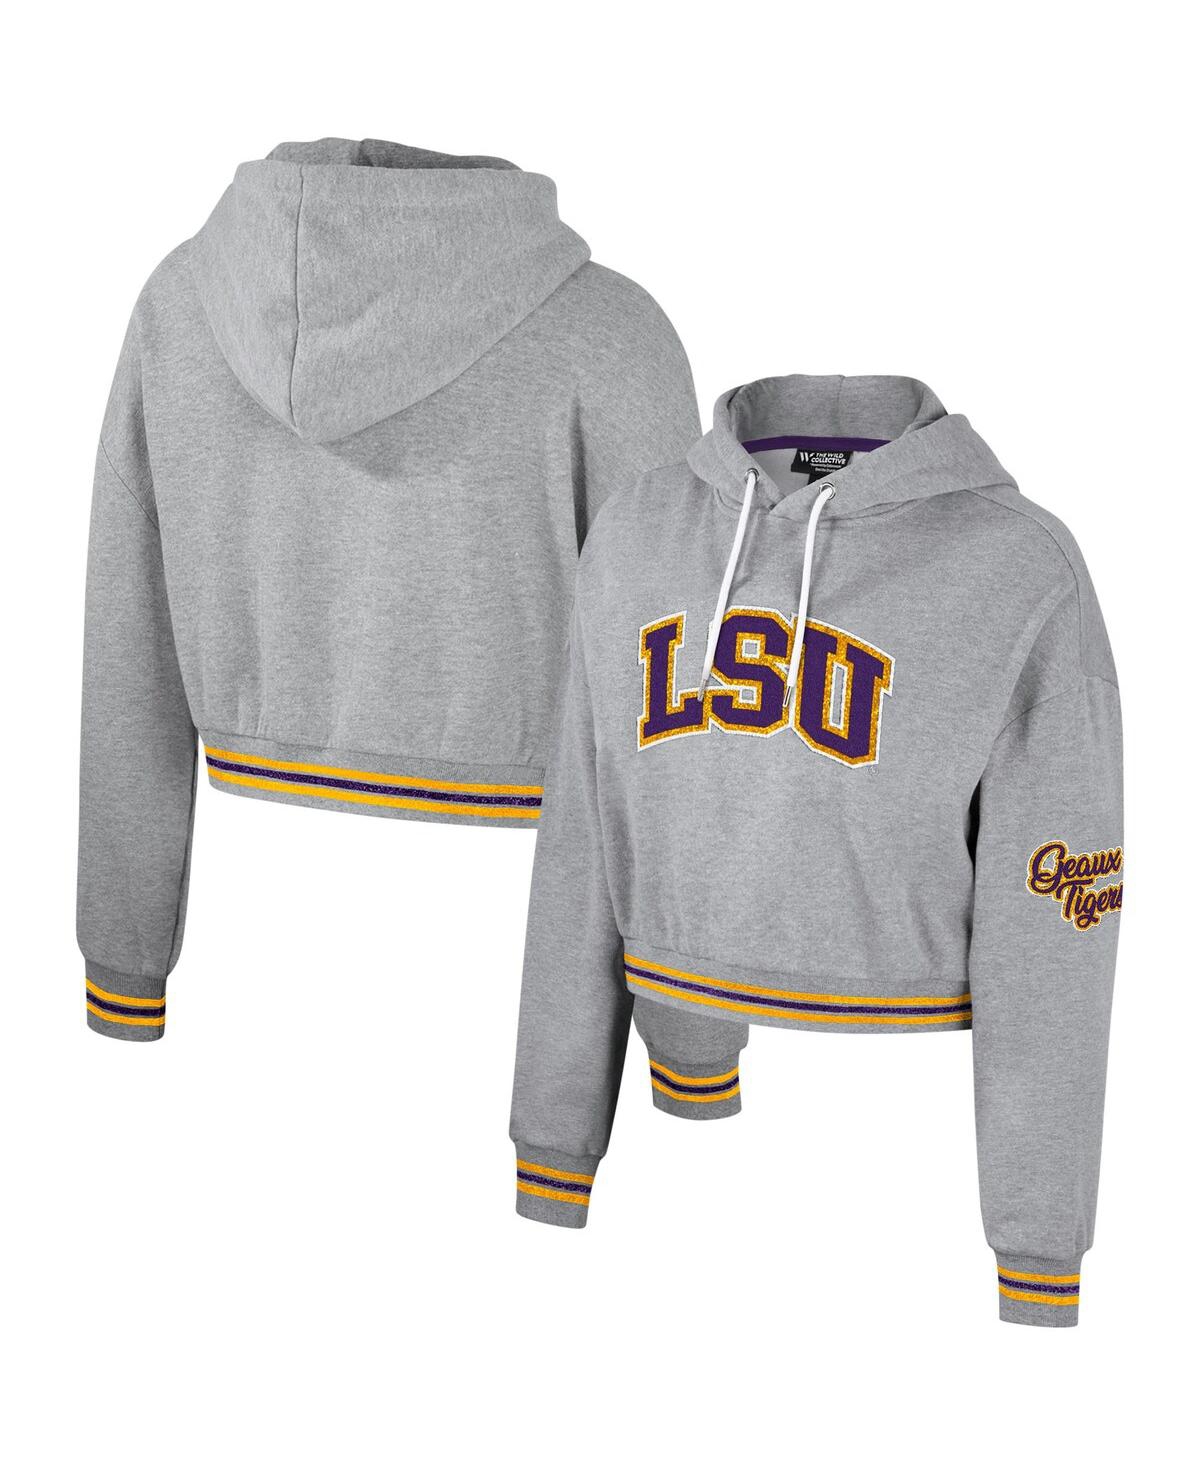 Women's The Wild Collective Heather Gray Distressed Lsu Tigers Cropped Shimmer Pullover Hoodie - Heather Gray